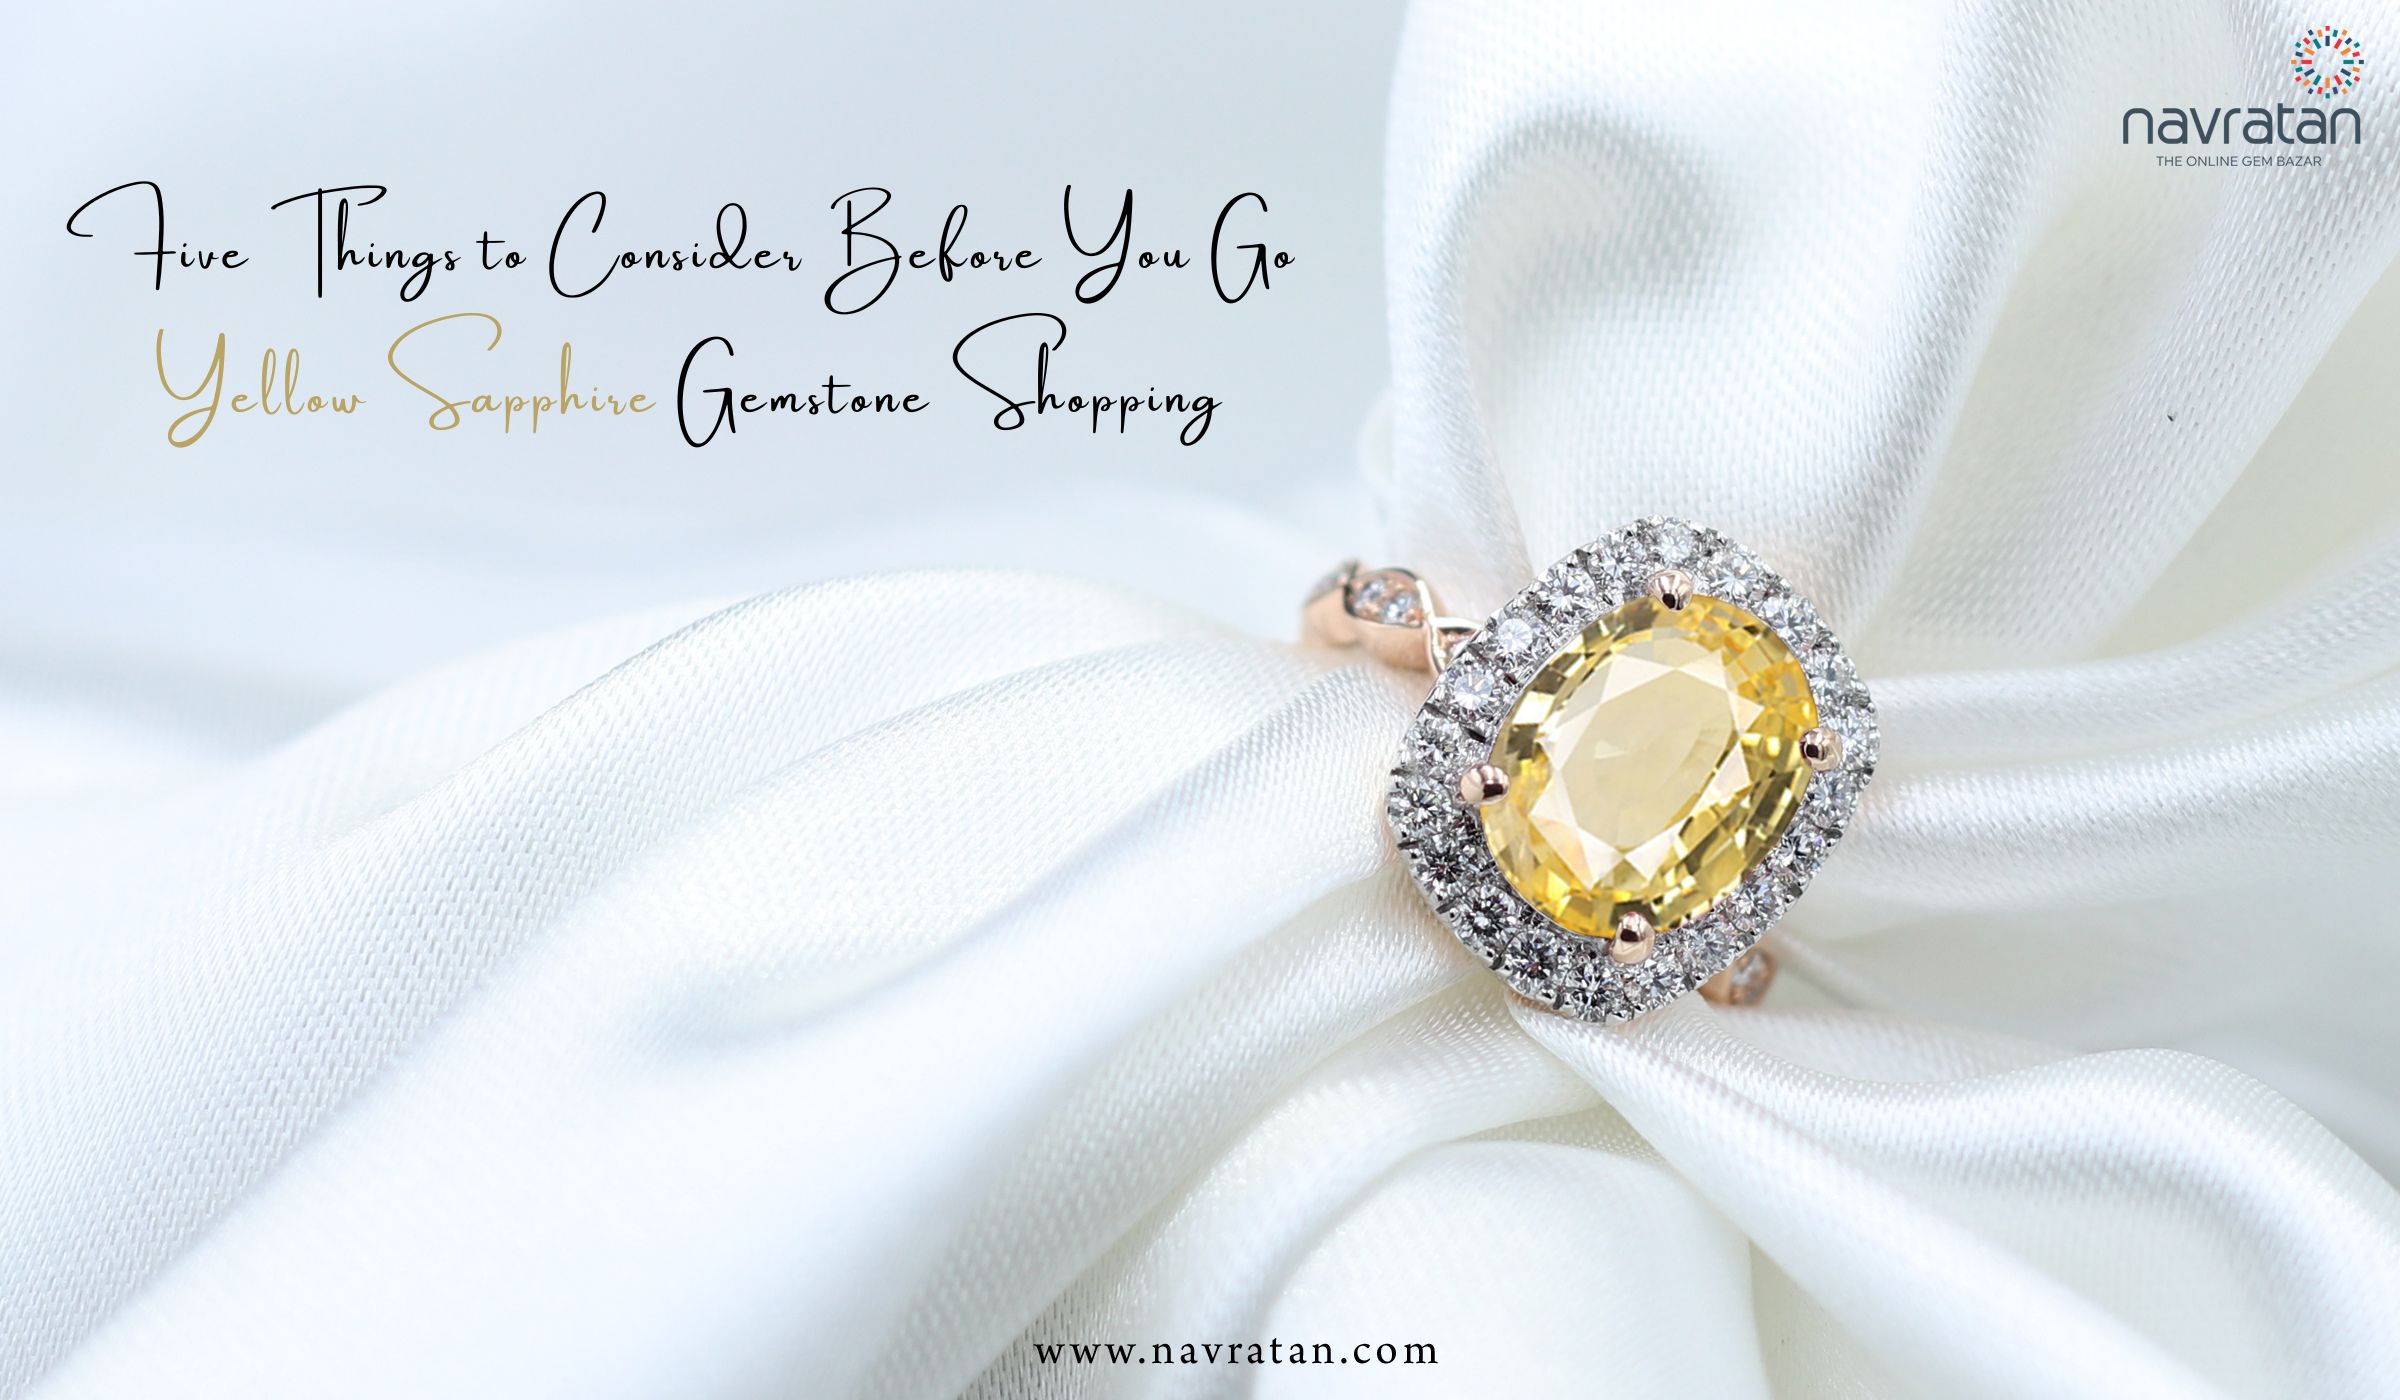 5 Things to Consider Before You Go Yellow Sapphire Gemstone Sho